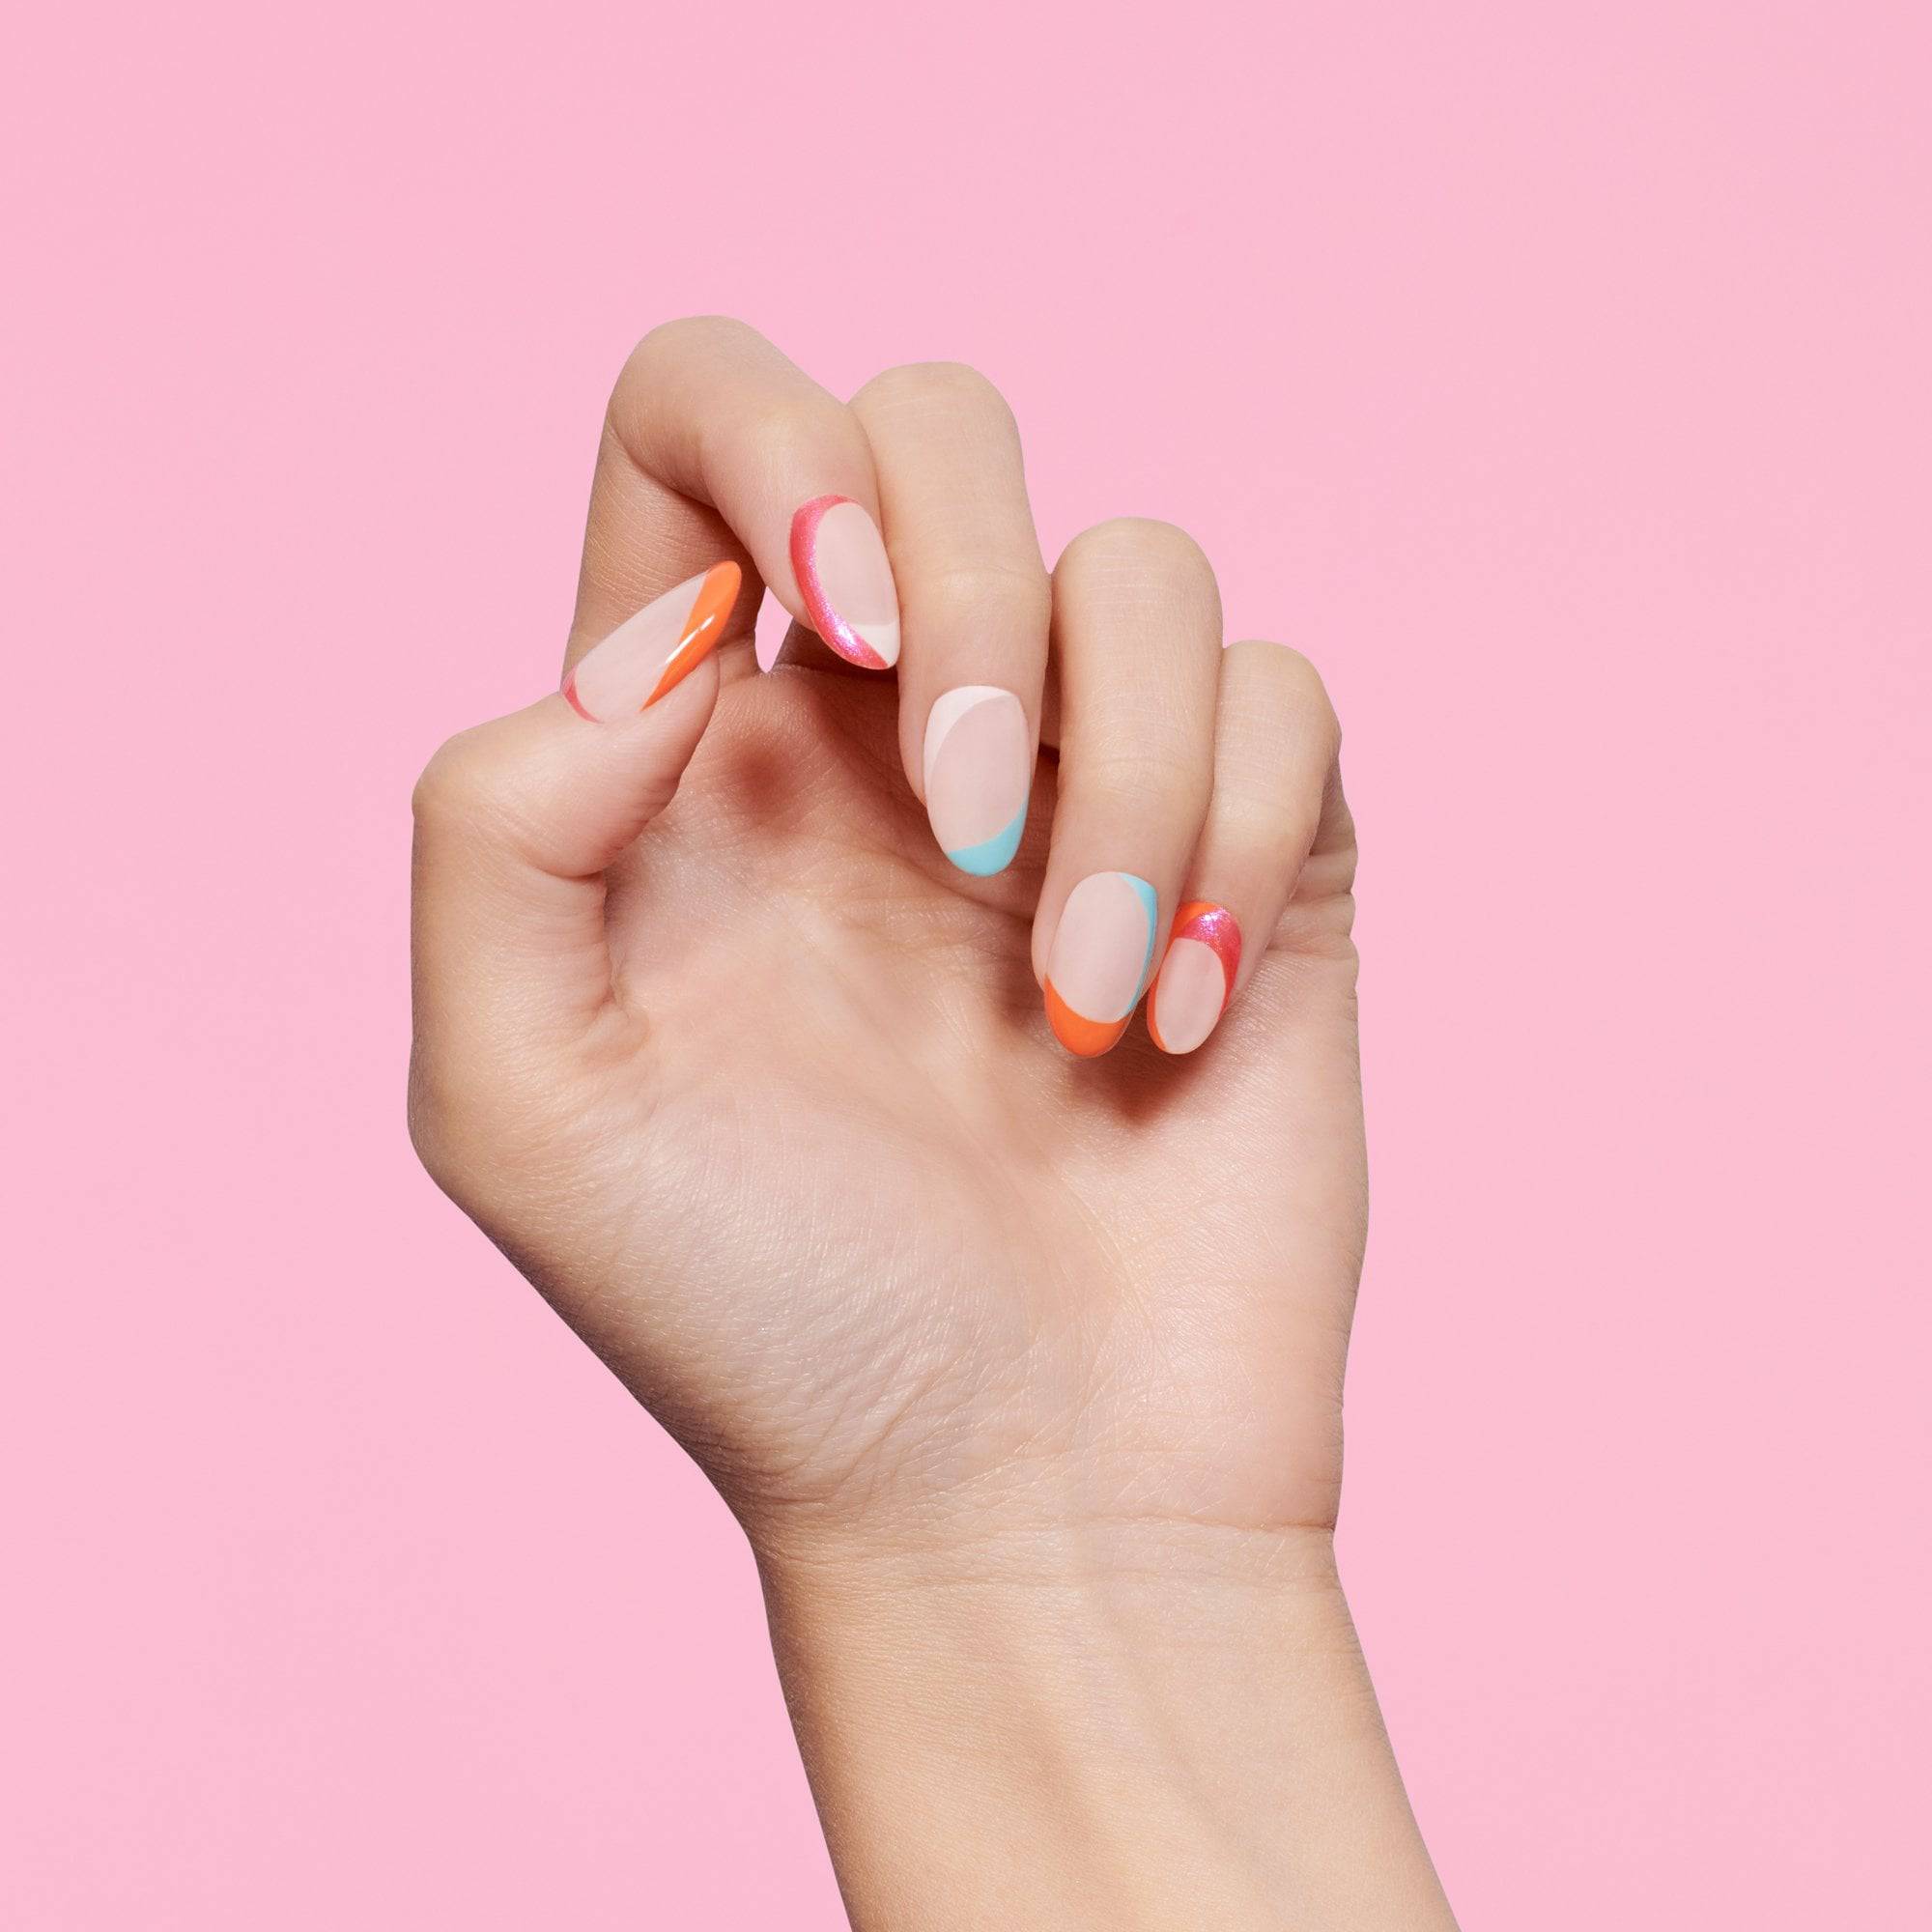 Brittle Nails Symptoms, Causes and Treatment |